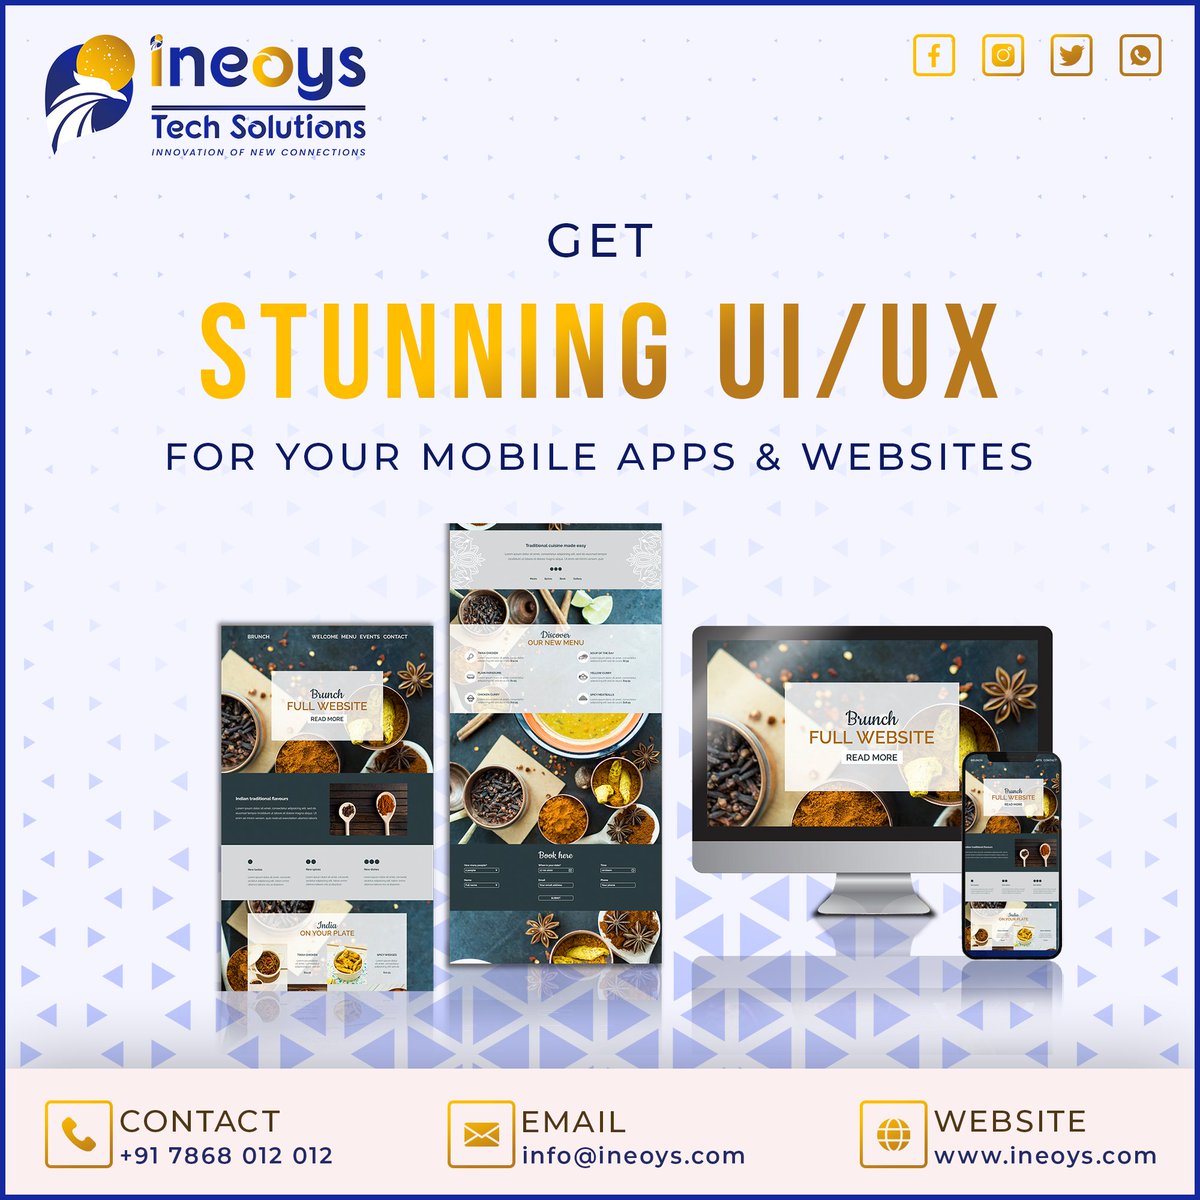 Get Stunning UI/UX For your Mobile Apps & Websites from us.

#advertising_insta #socialmediaadvertising #mediaagency
#advertising_agency #creativeadvertisingideas #ineoys
#ineoysmadurai #ineoystechsolutionsmadurai